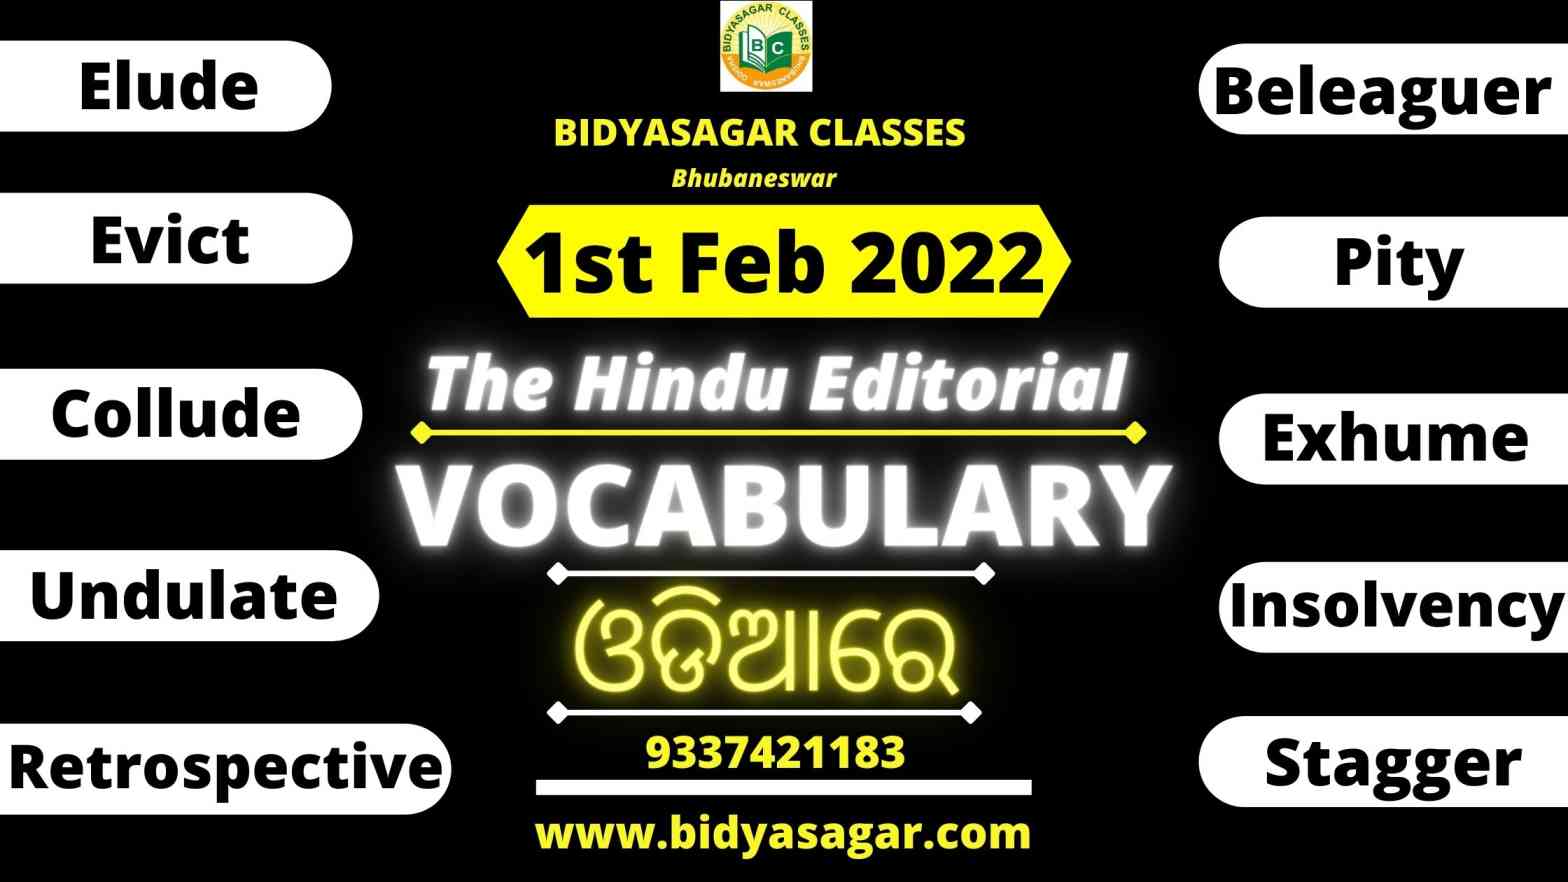 The Hindu Editorial Vocabulary of 1st february 2022